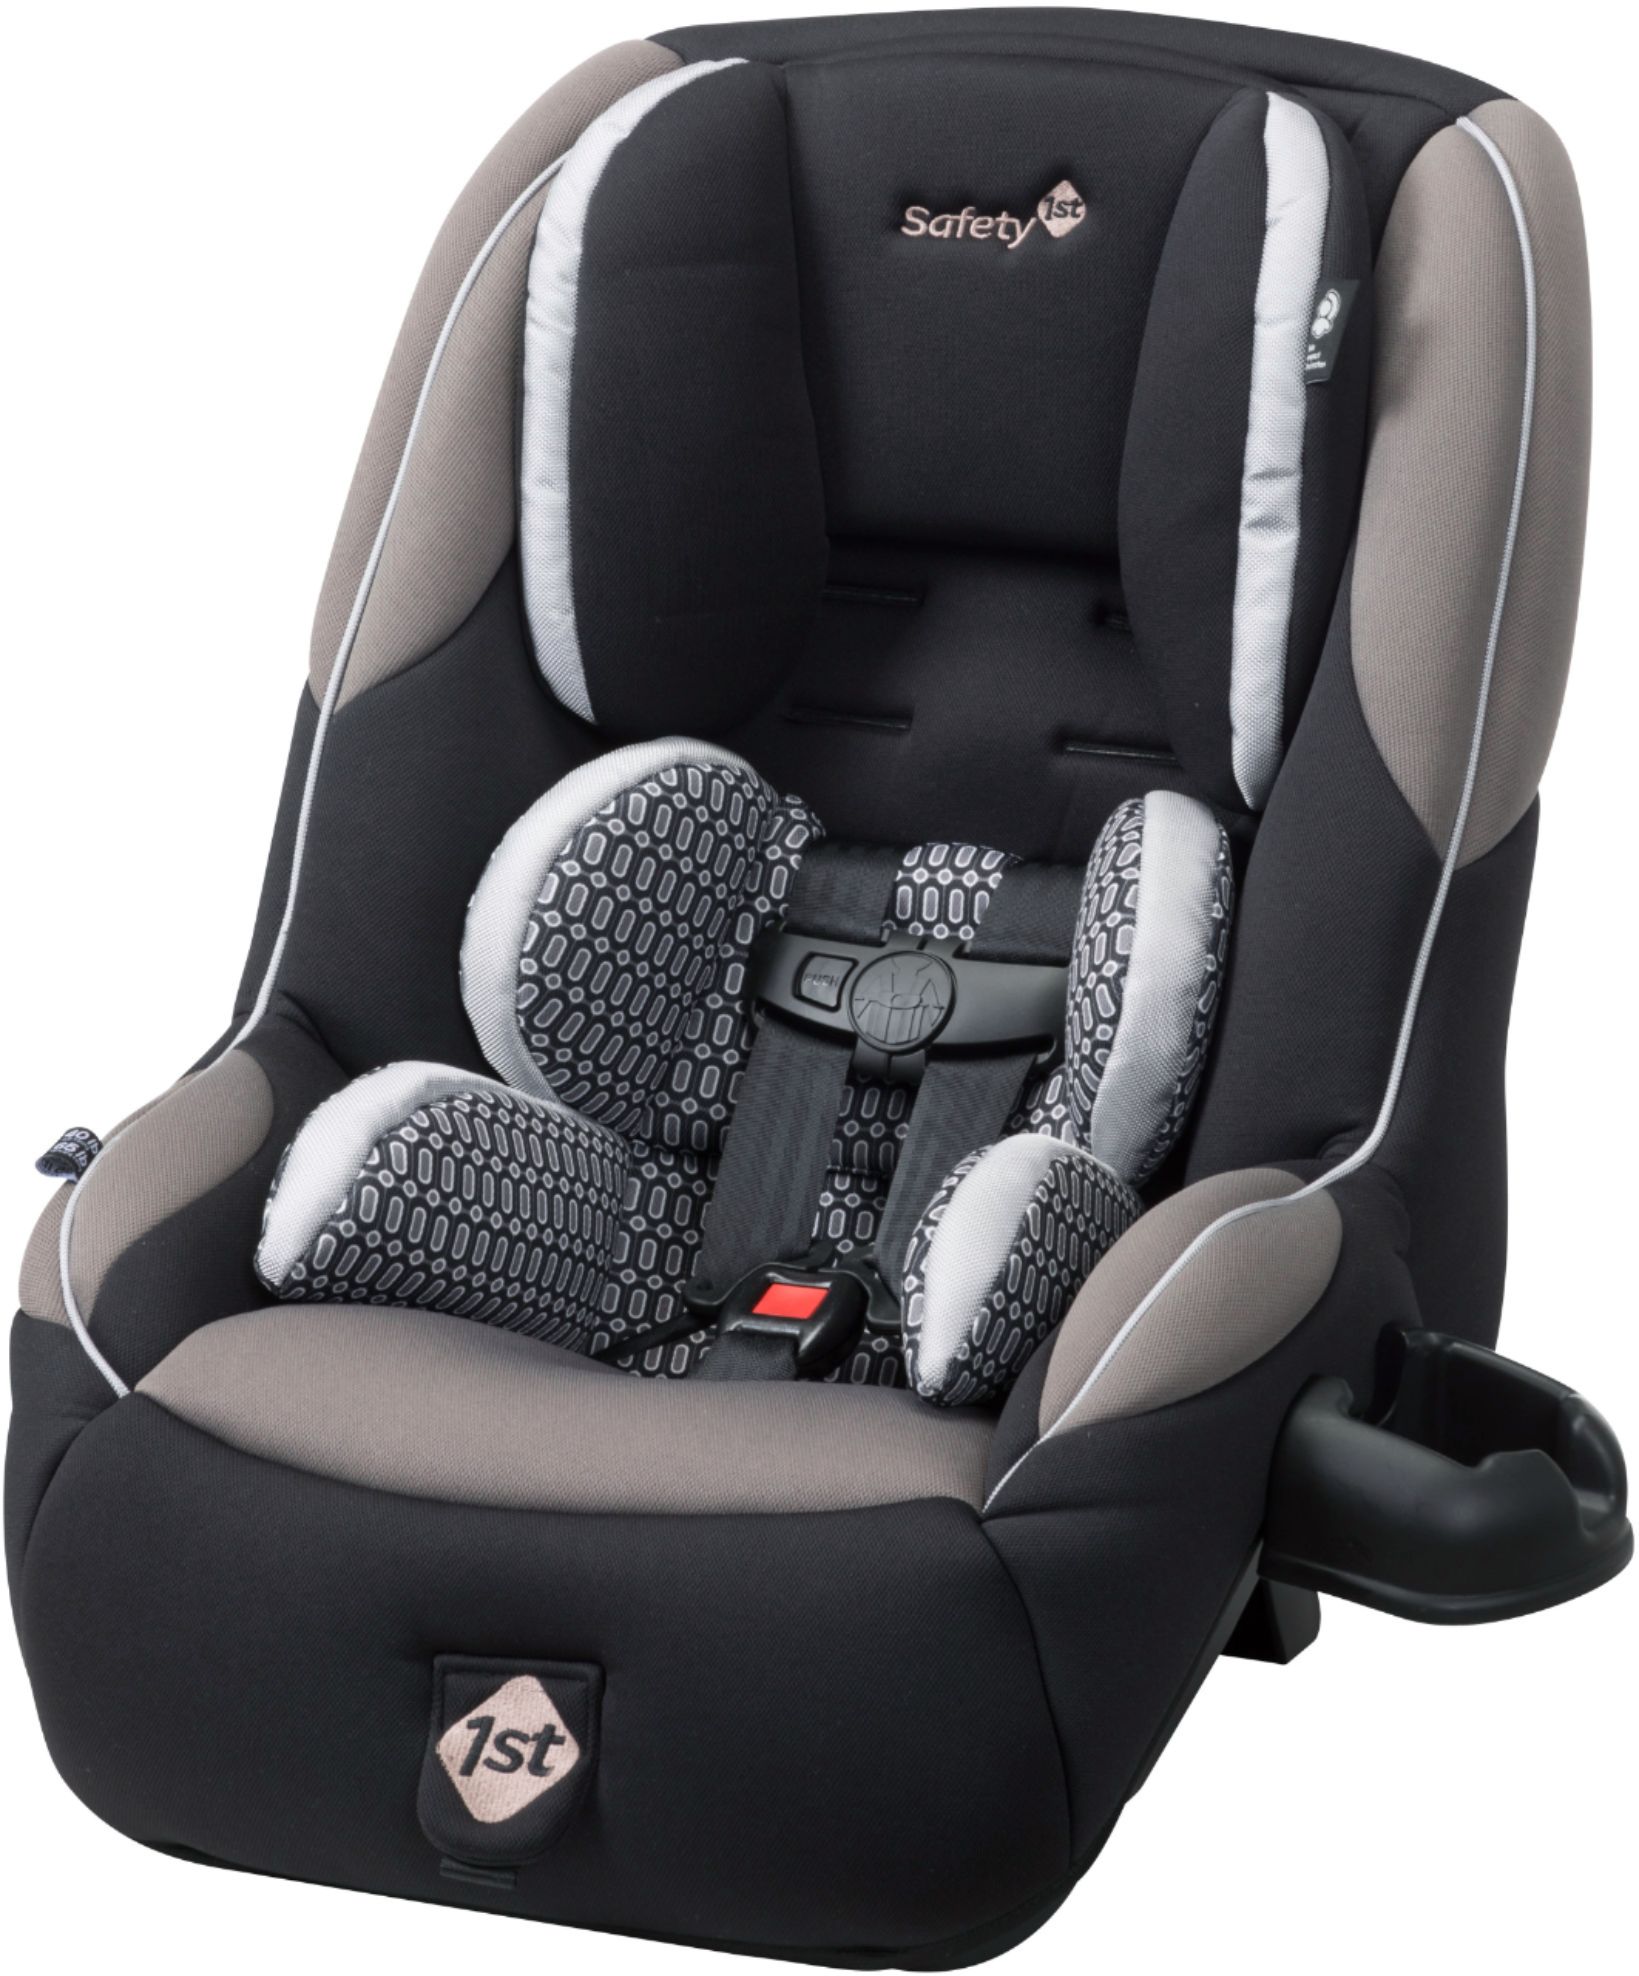 Left View: Safety 1st - Guide 65 Convertible Car Seat - Grey